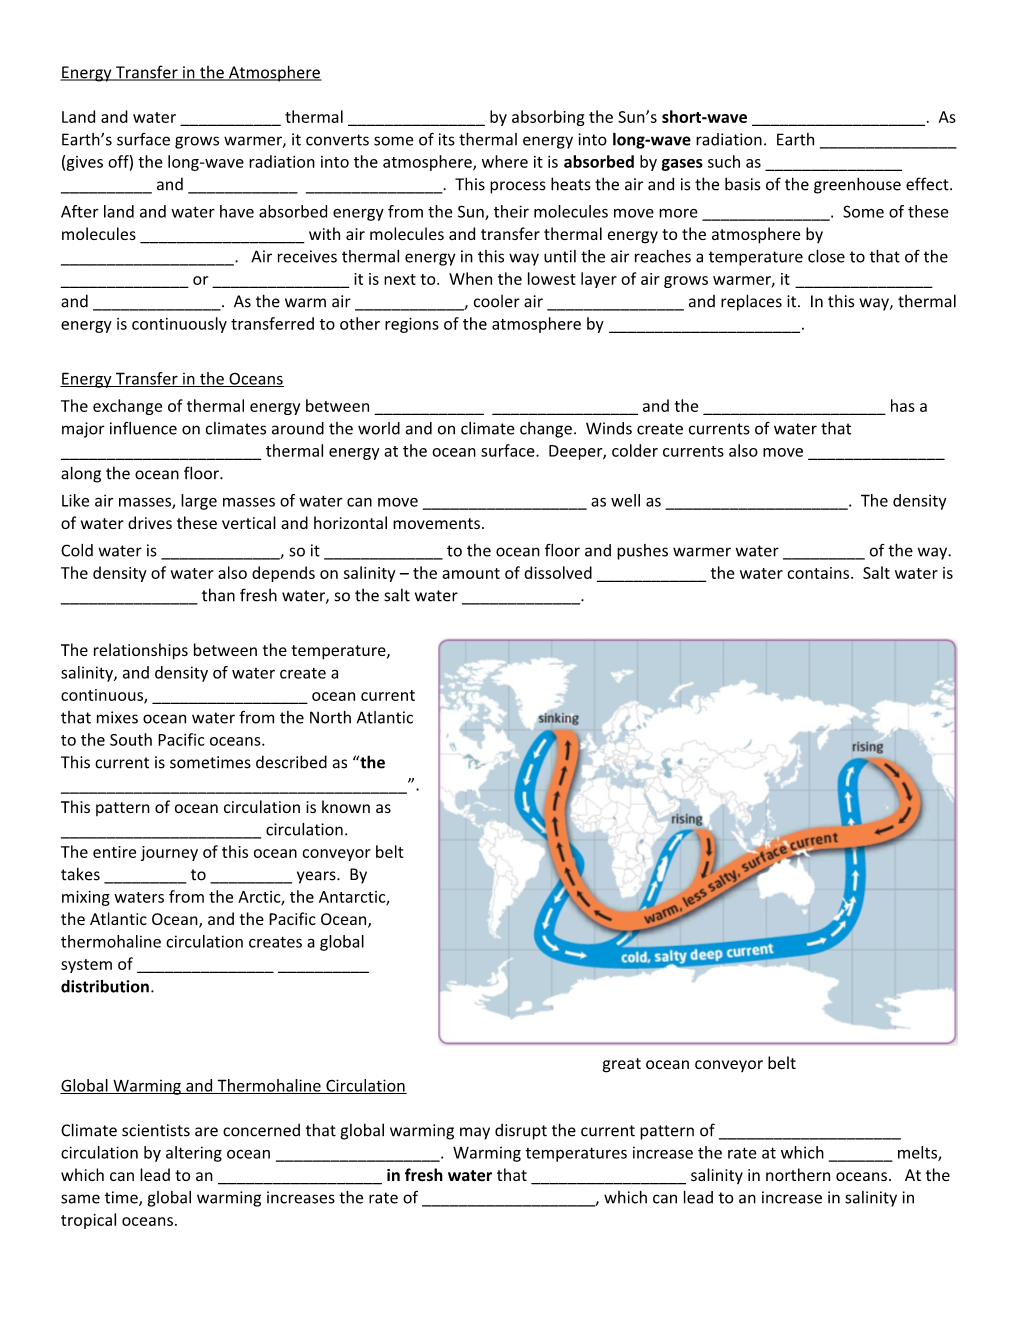 Energy Transfer in the Climate System